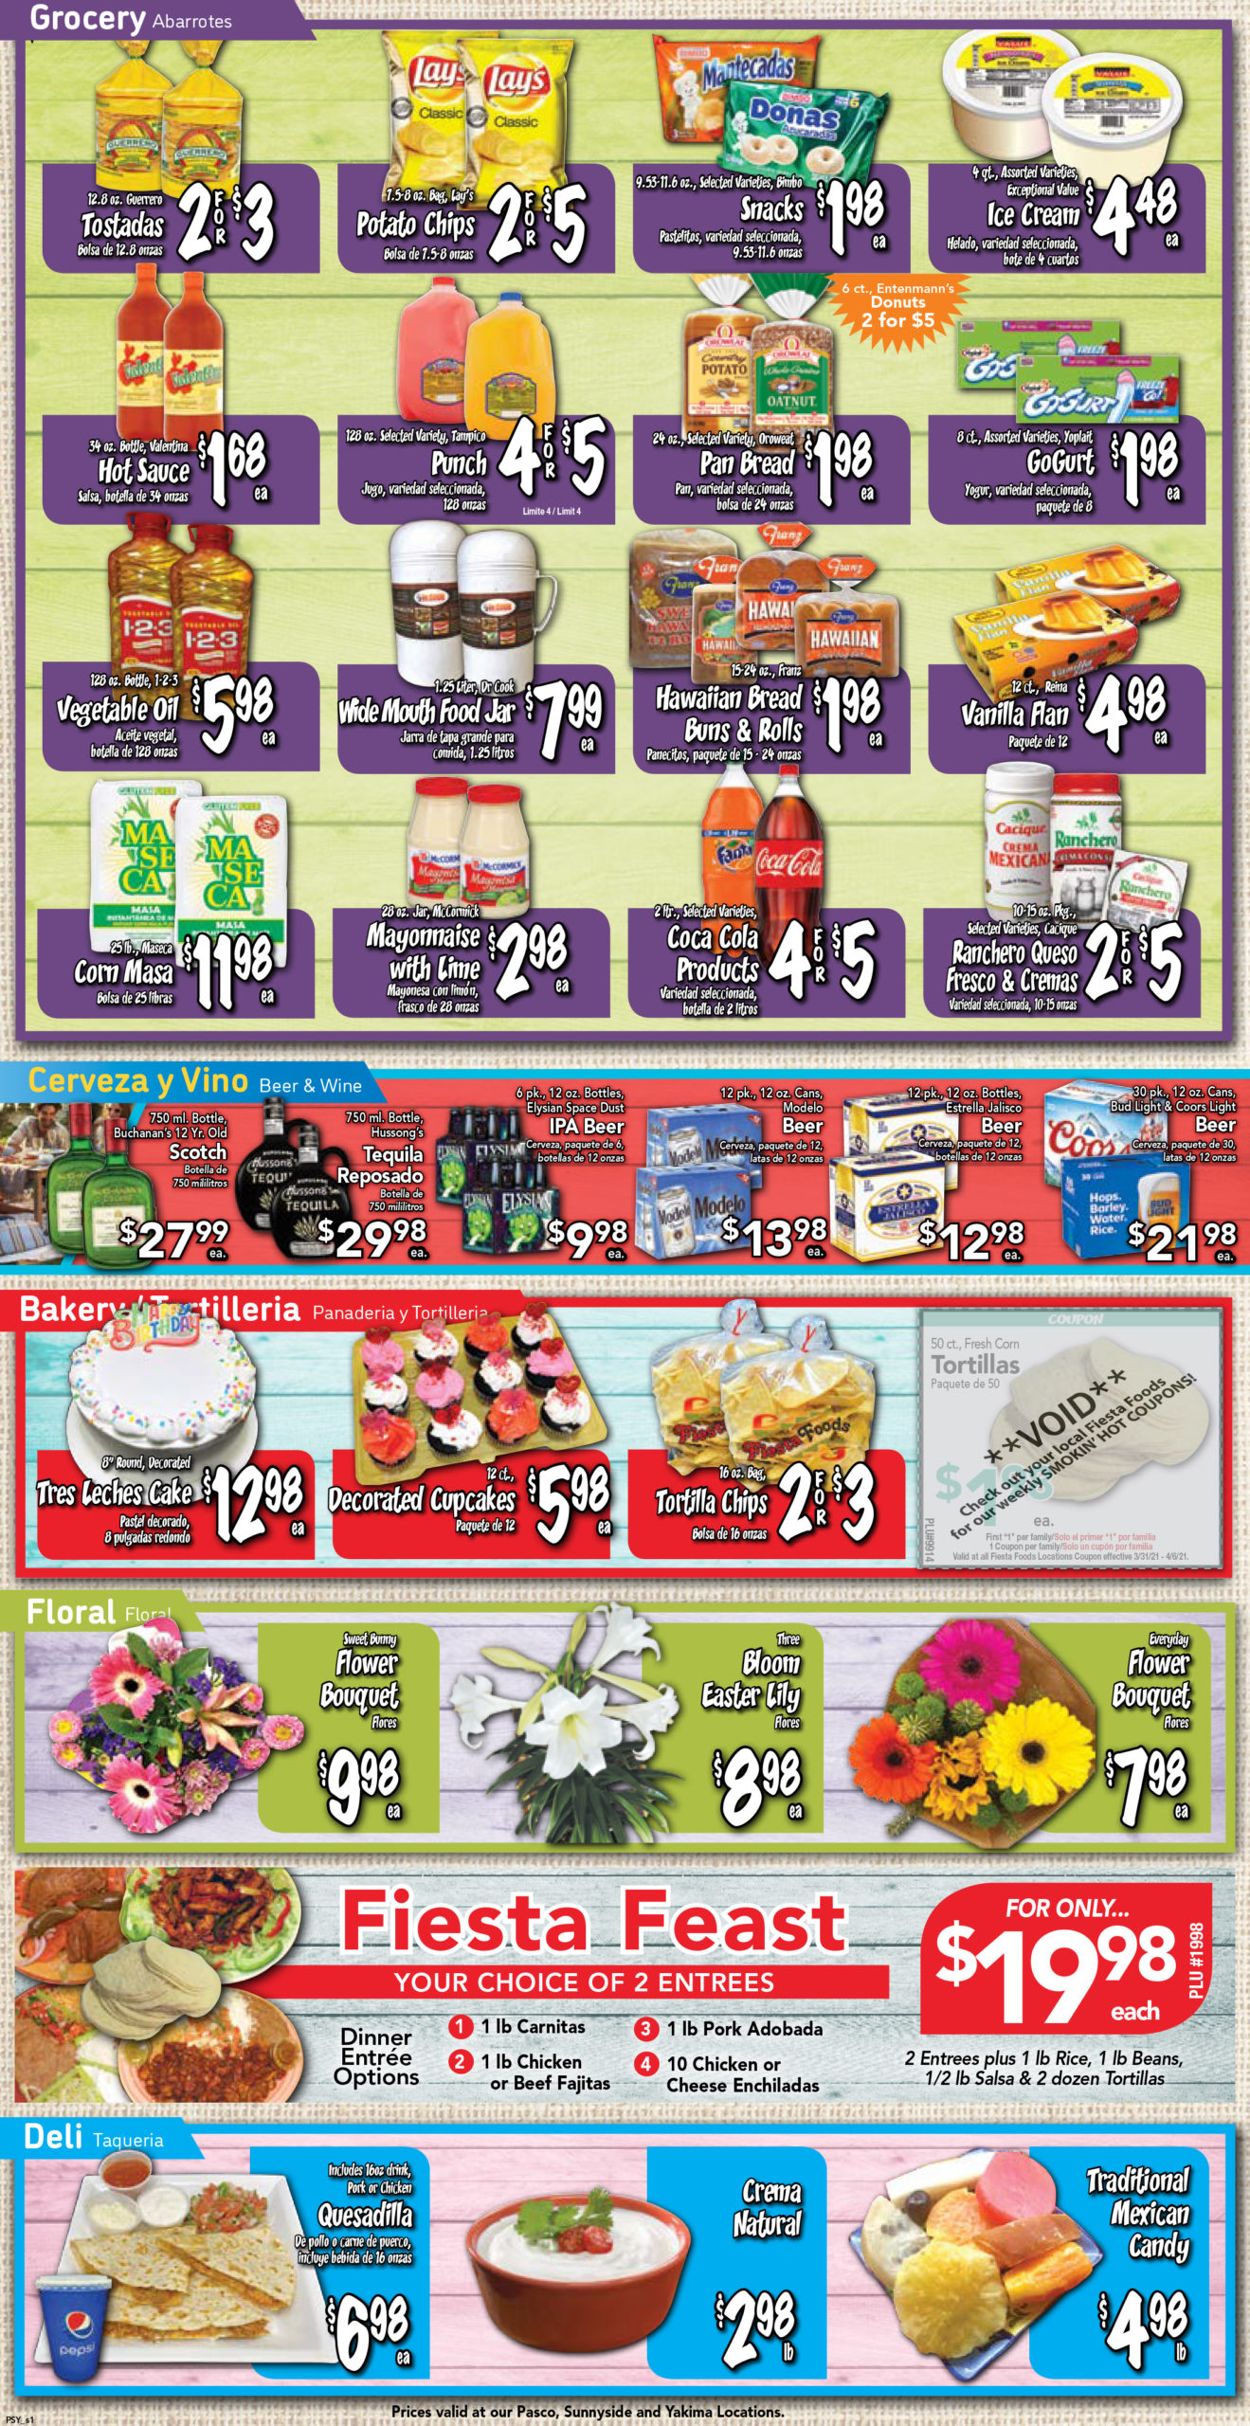 Fiesta Foods SuperMarkets Easter 2021 ad Weekly Ad Circular - valid 03/31-04/06/2021 (Page 2)